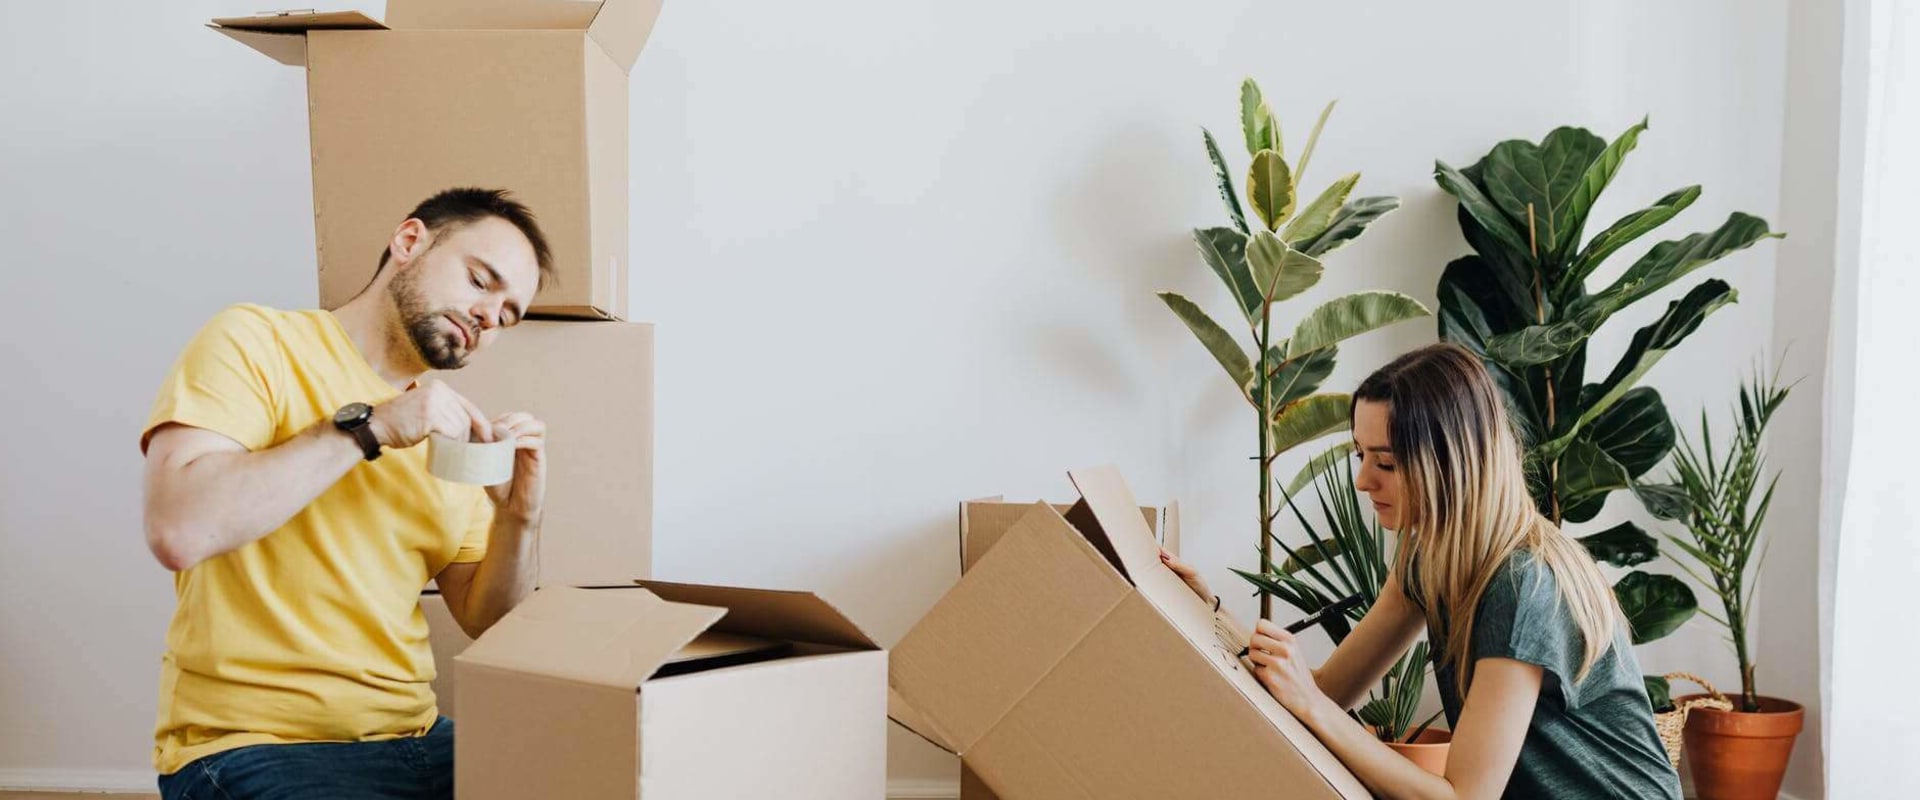 Moving and Storage: How to Pack Your Belongings Properly